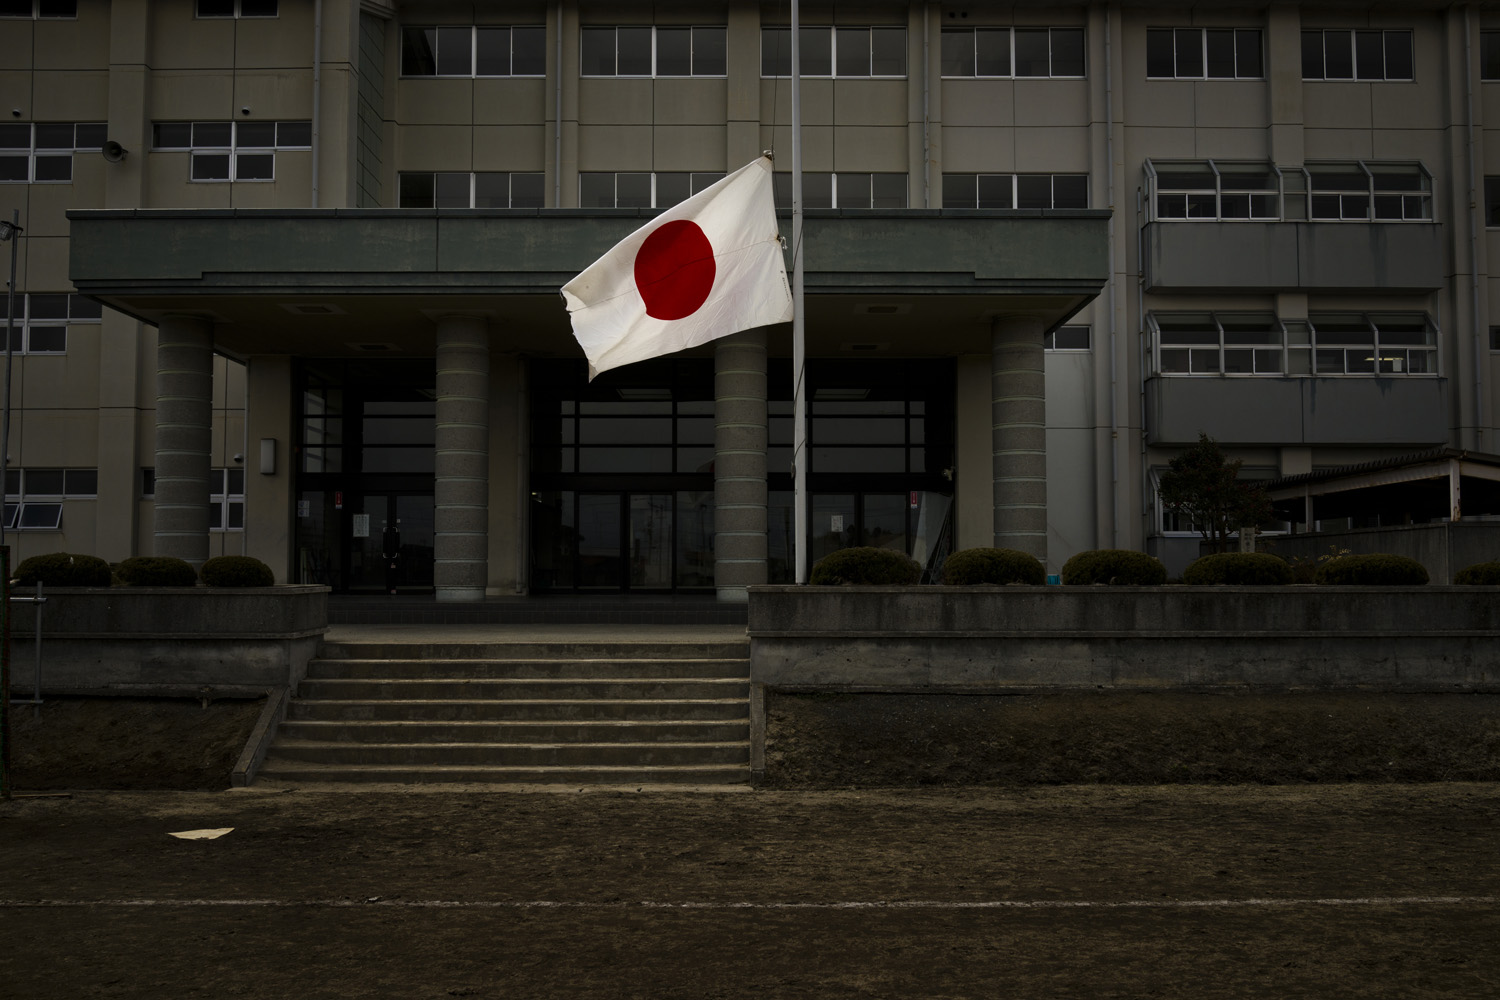 Japan, Minamisoma, 2014A Japanese flag flies at half mast during the third anniversary of the Earthquake and Tsunami that hit the north west coast of Japan and damaged the Daiichi nuclear plant approximately 30km away which has seen many residents return.